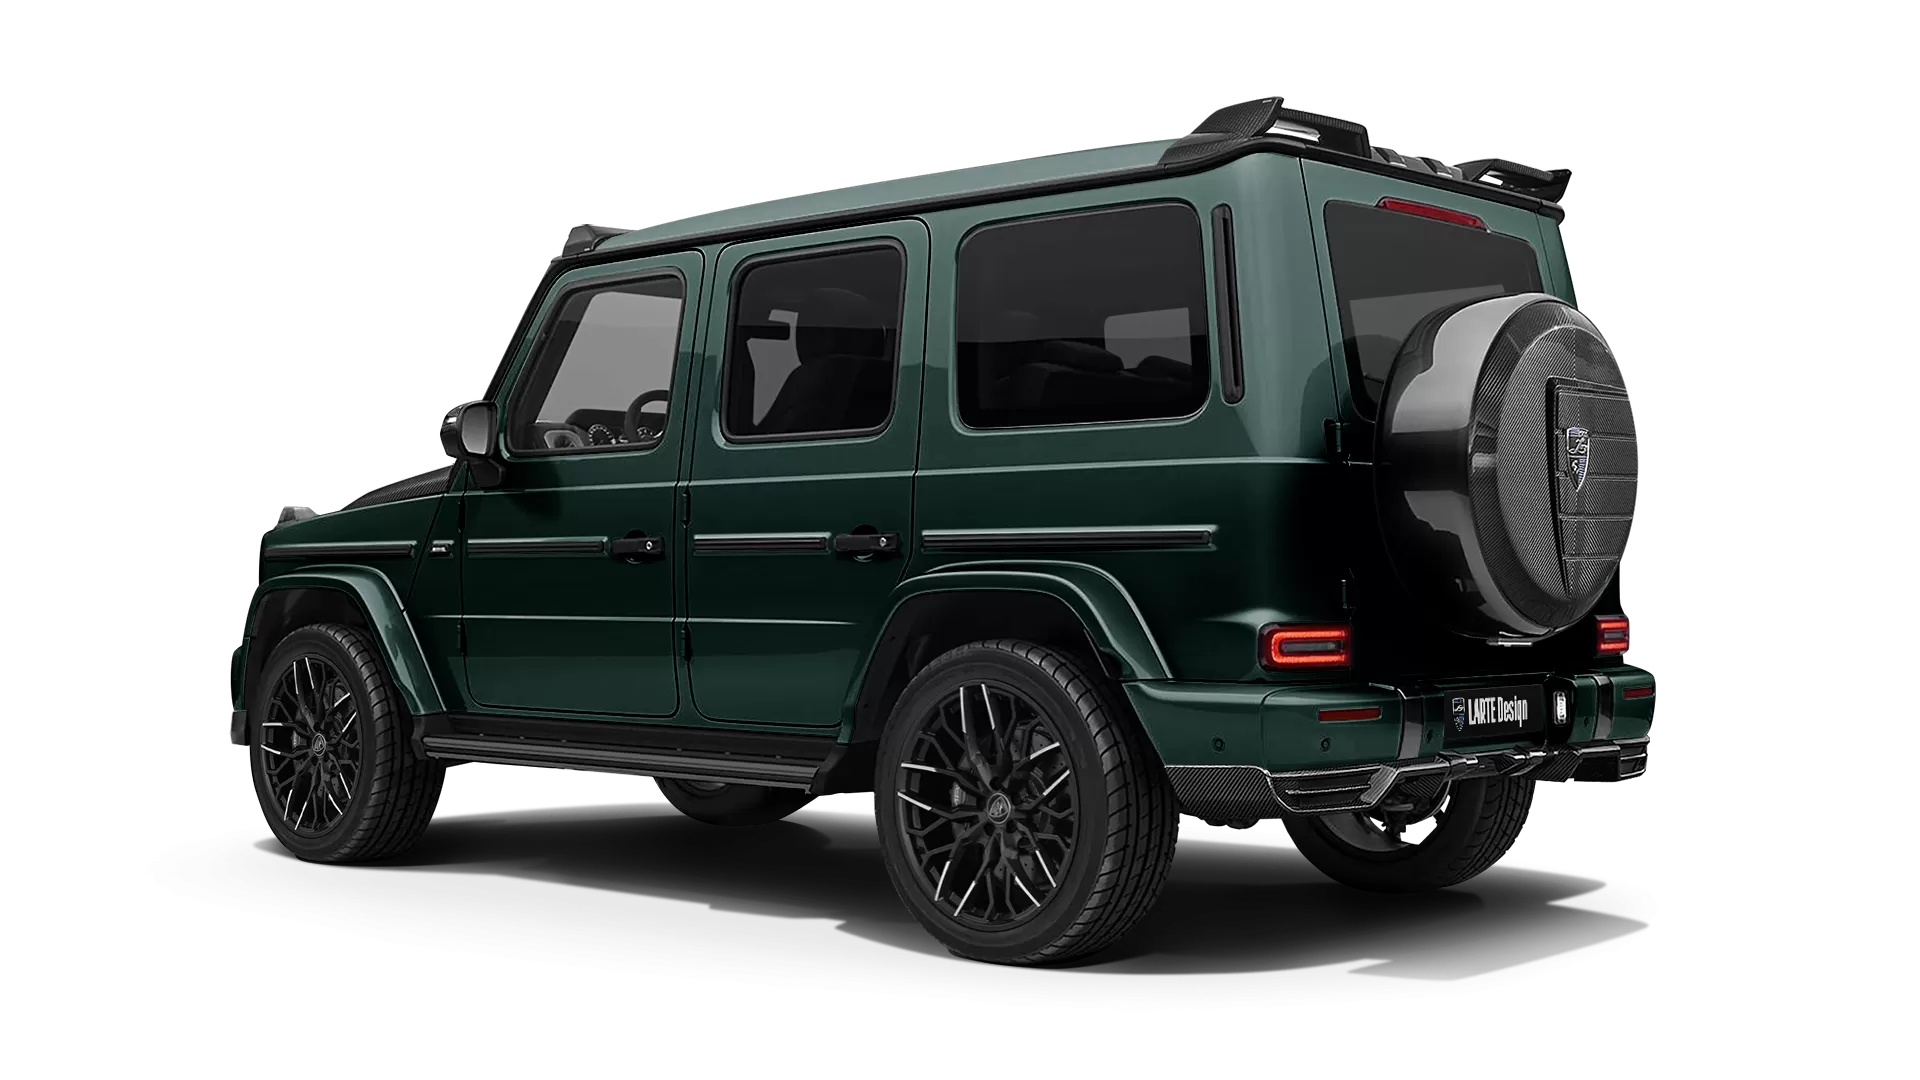 Mercedes G class W463 with carbon body kit: back view shown in Emerald Green